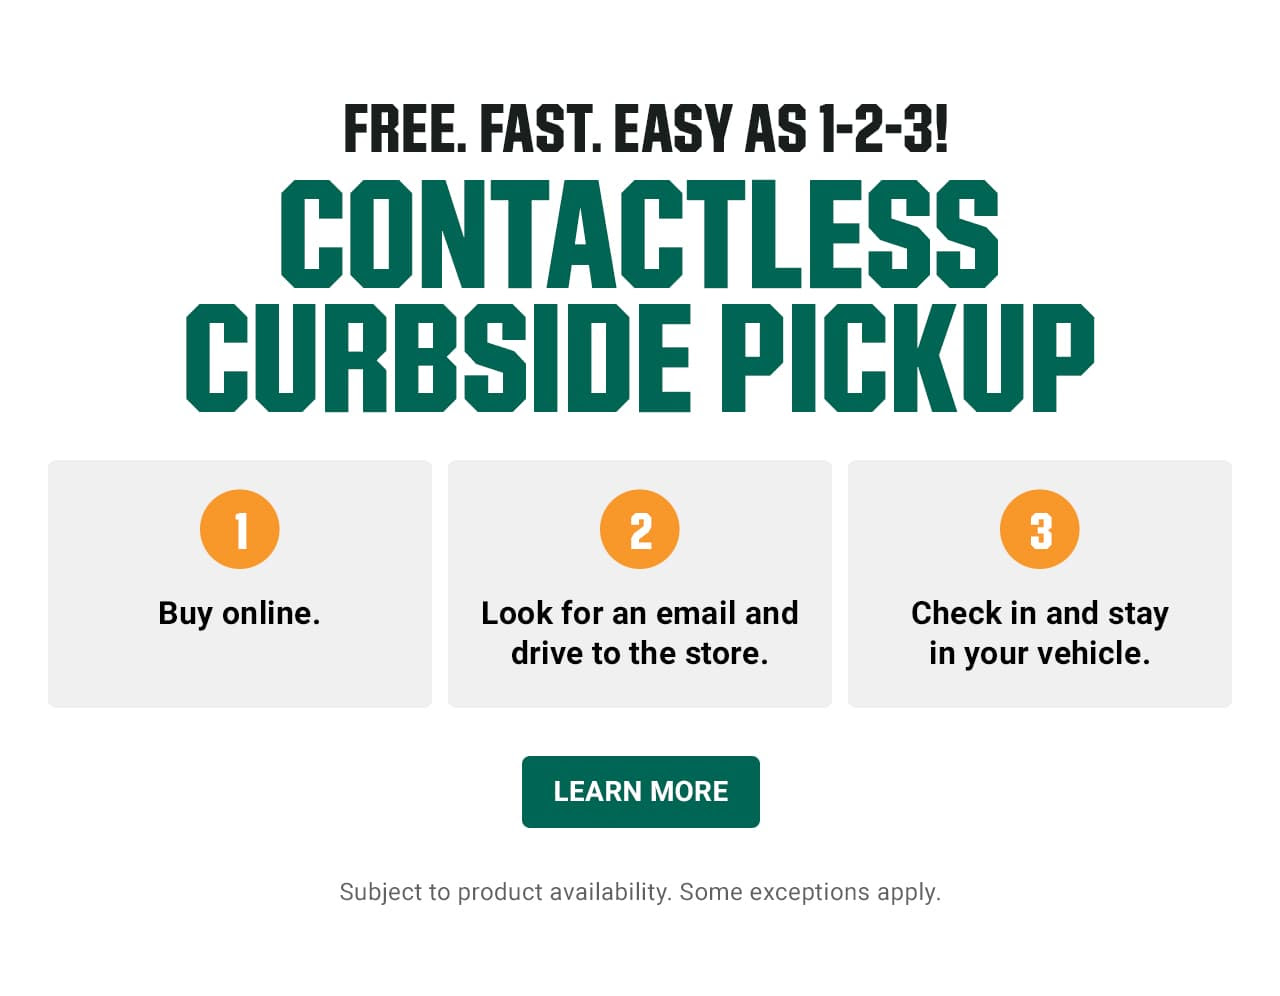 Free. Fast. Easy as one-two-three! Contactless curbside pickup. 1, Buy Online. 2, Look for an email and drive to the store. 3, Check in and stay in your vehicle. Subject to product availability. Some exceptions apply. Learn more.